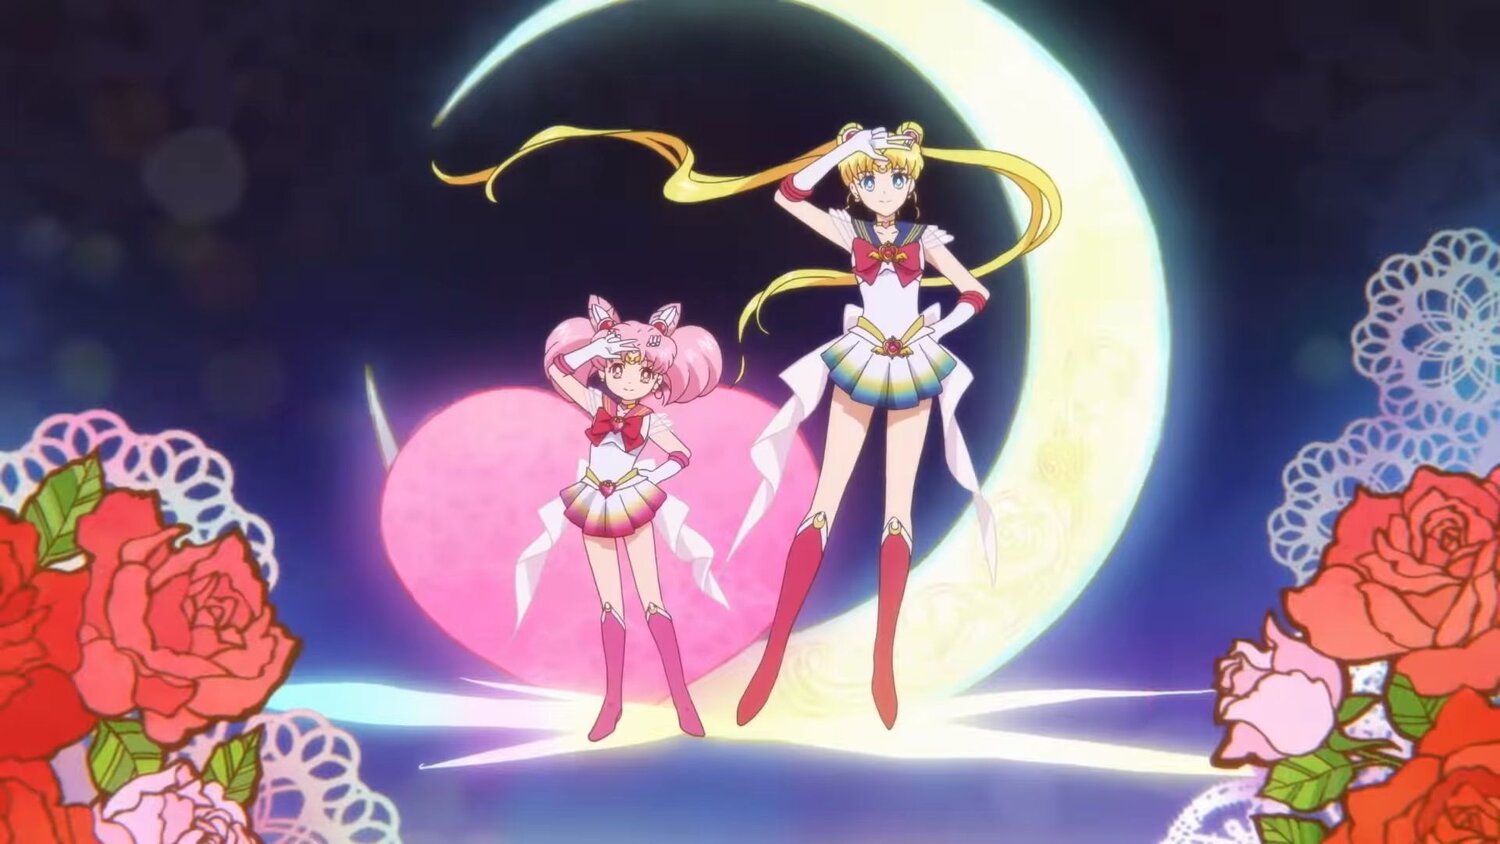 Pretty Guardian Sailor Moon Eternal The Movie Gets A New Teaser For January Release In Japan Geektyrant I thought this was a particularly damning line: geektyrant